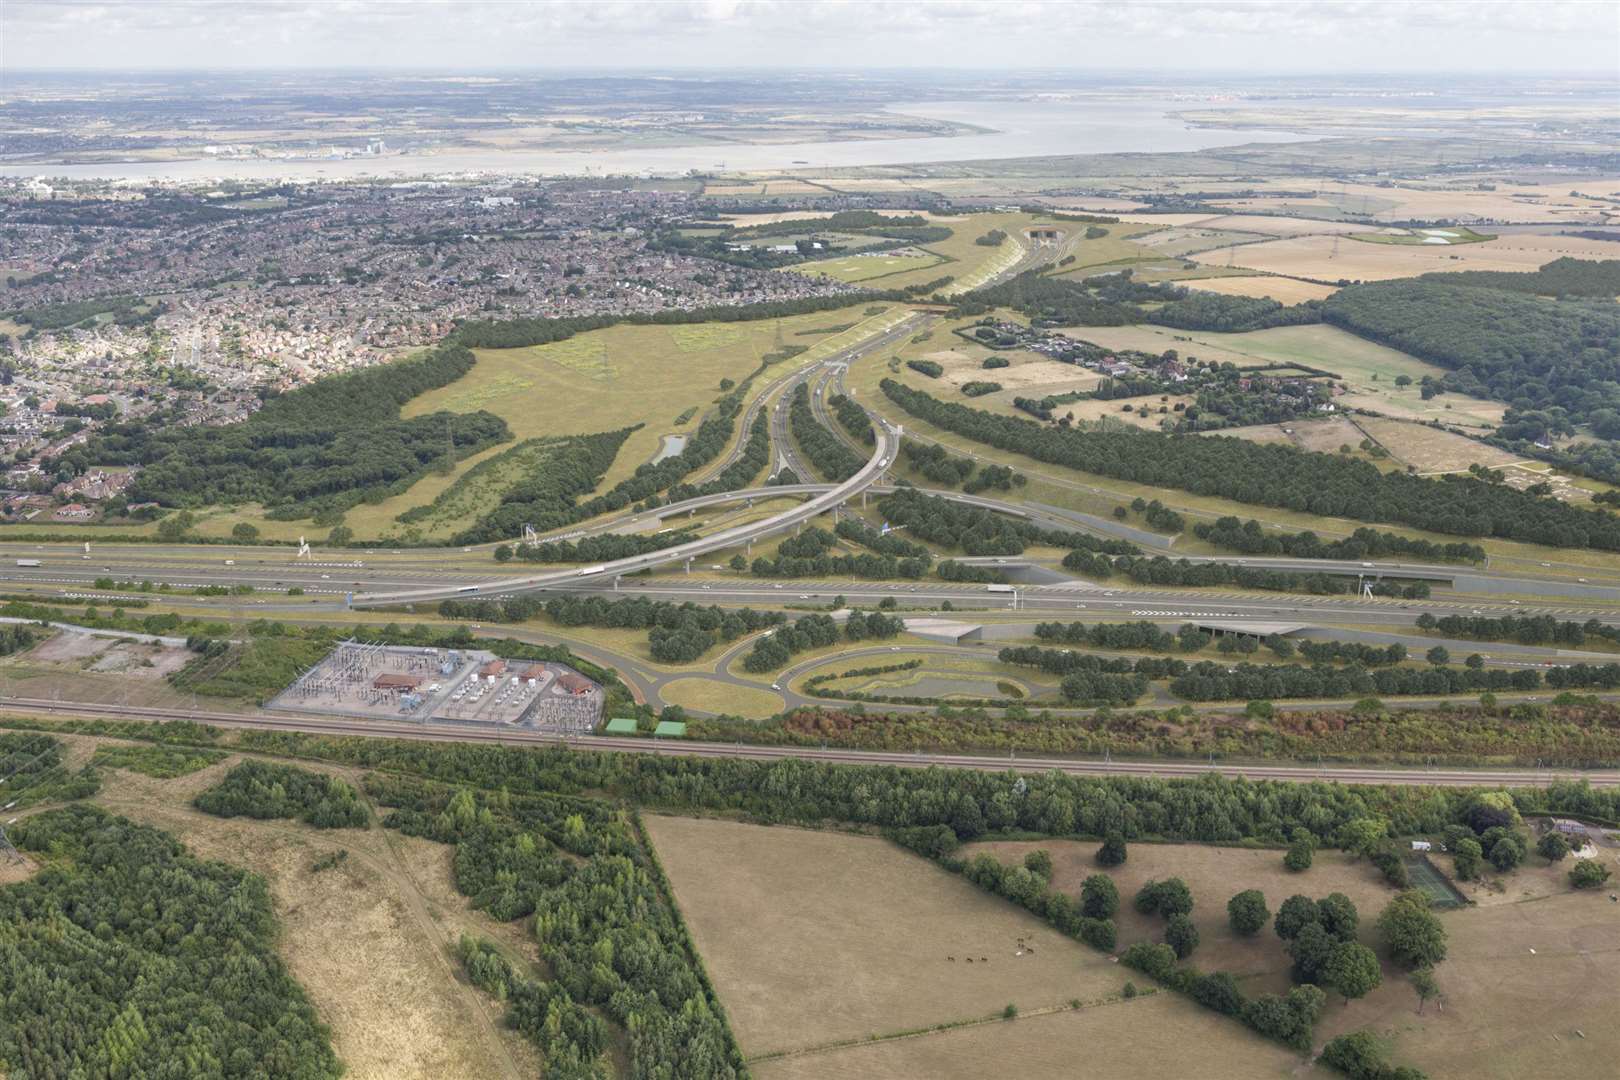 The proposed view looking north from the A2 to the Lower Thames Crossing. Image from Highways England